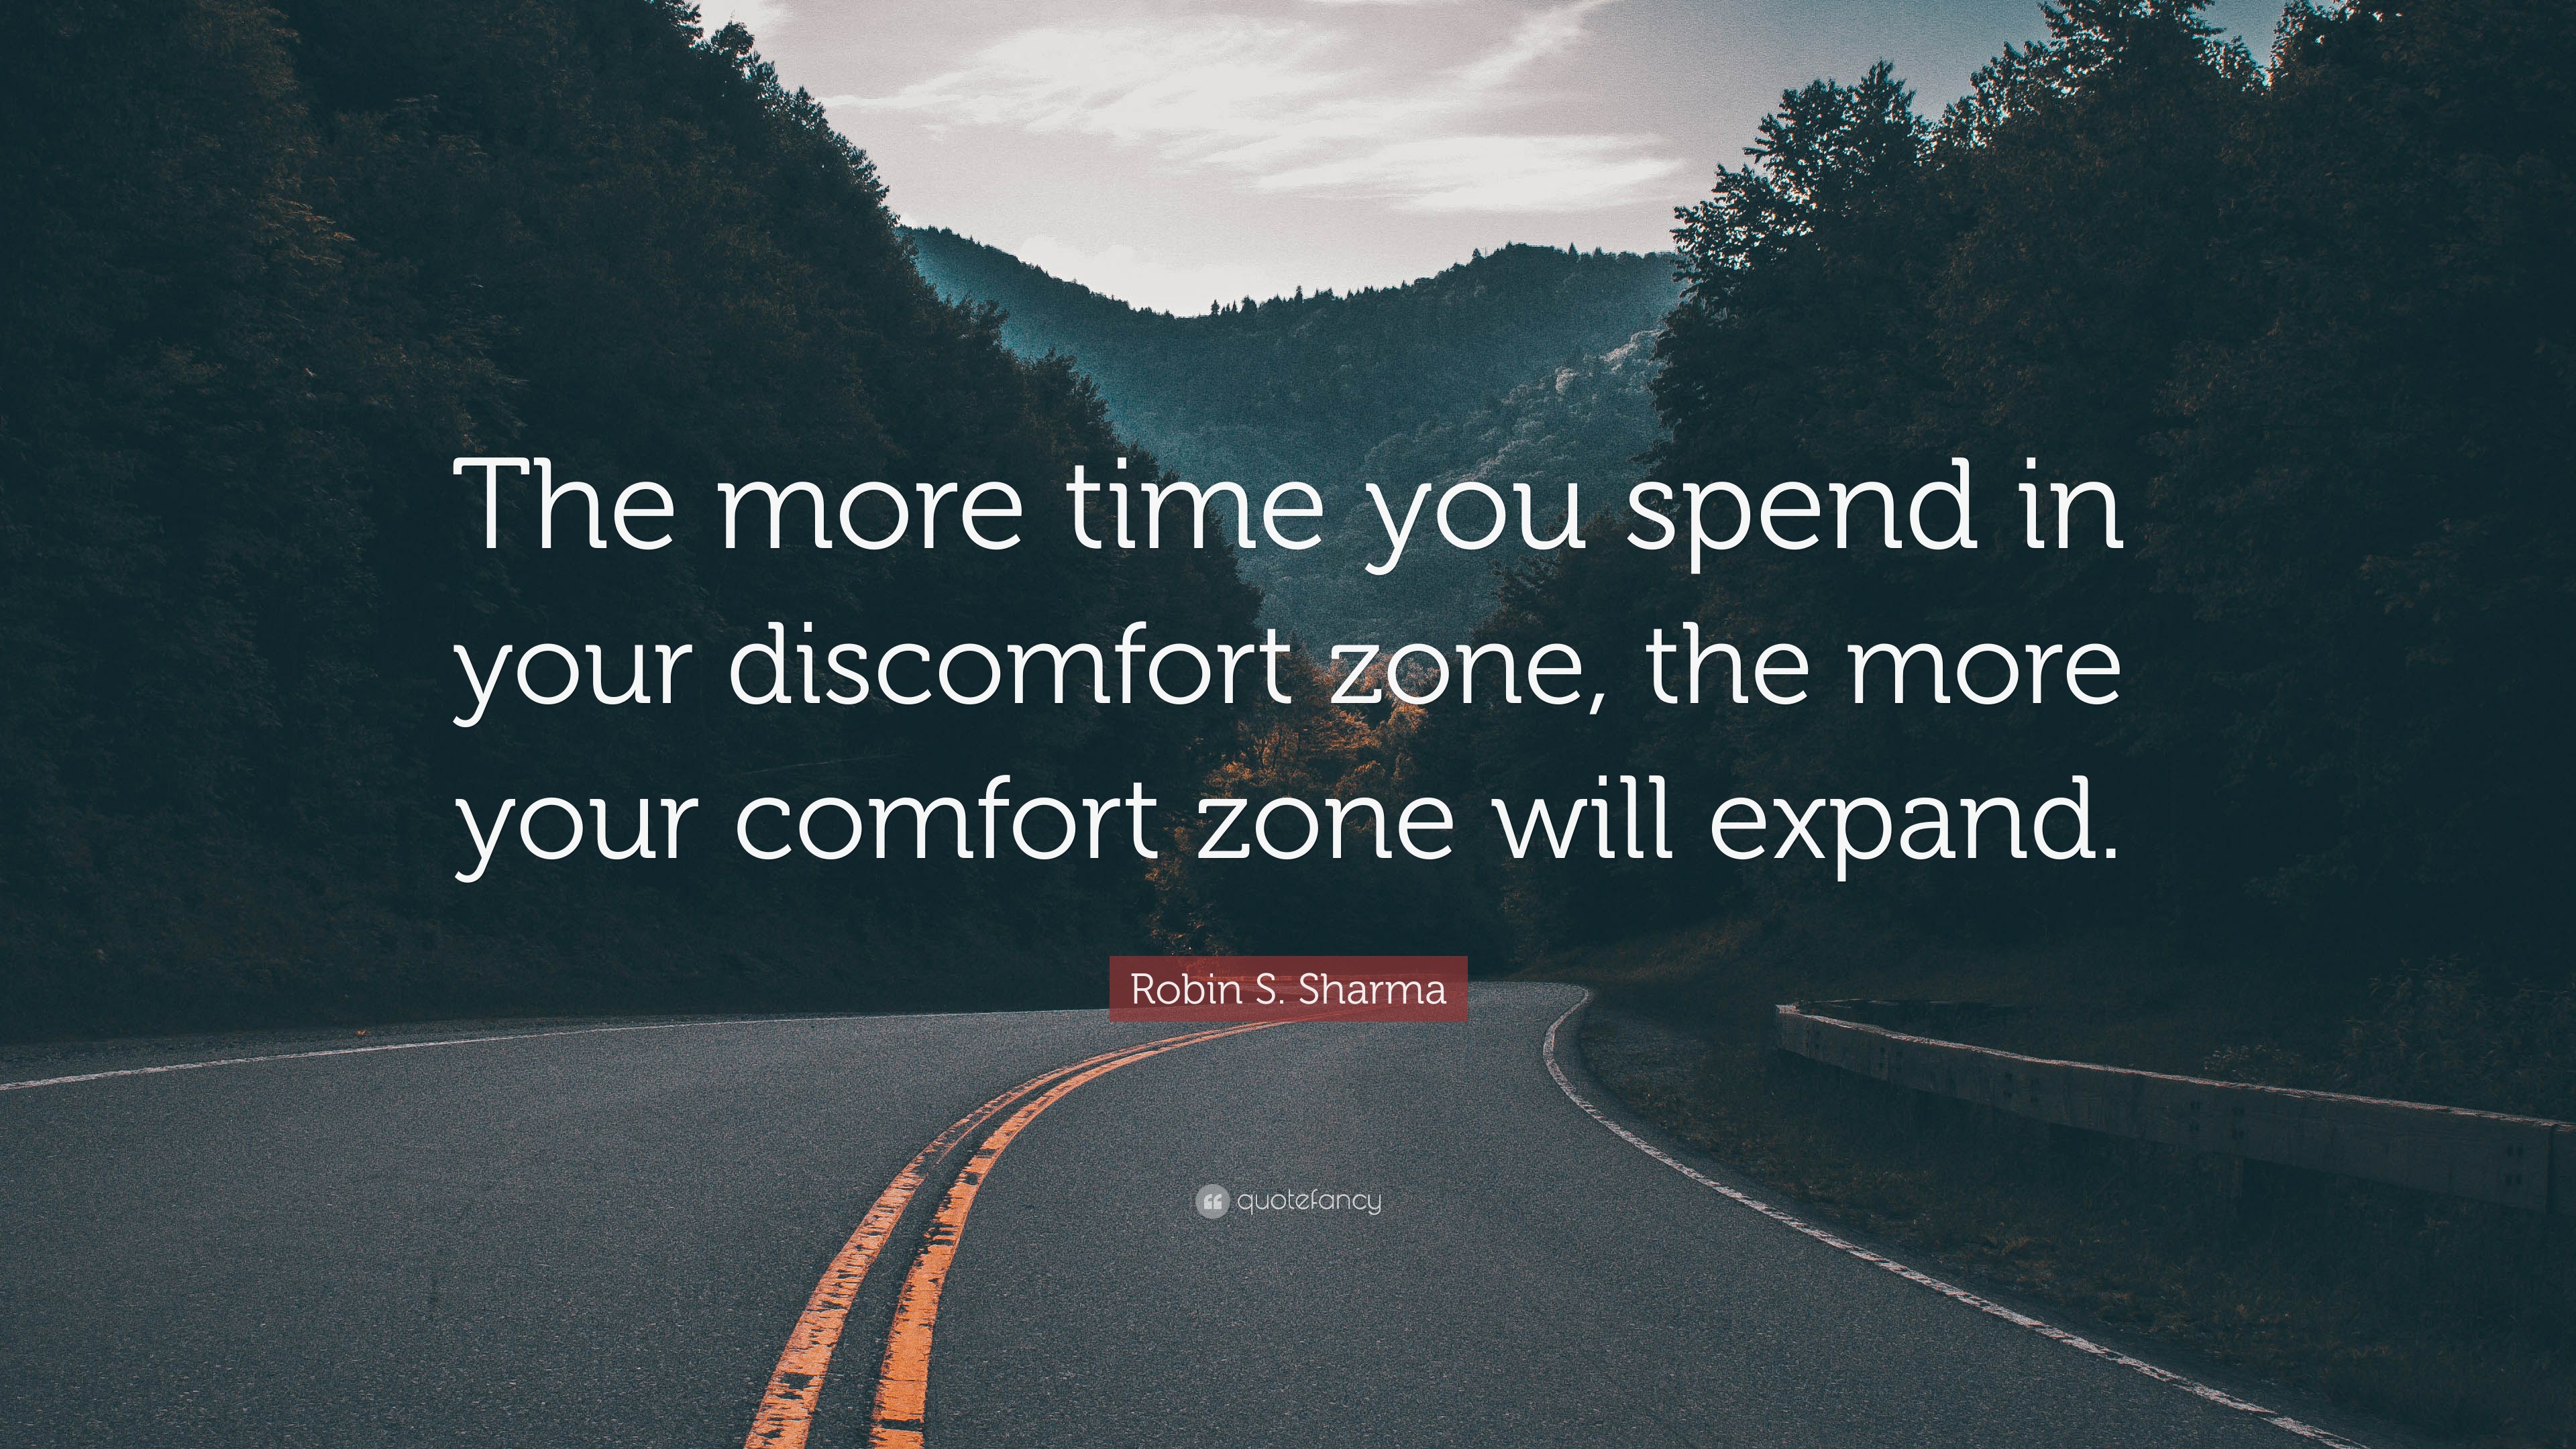 The more time you spend in your discomfort zone, the more your comfort zone...